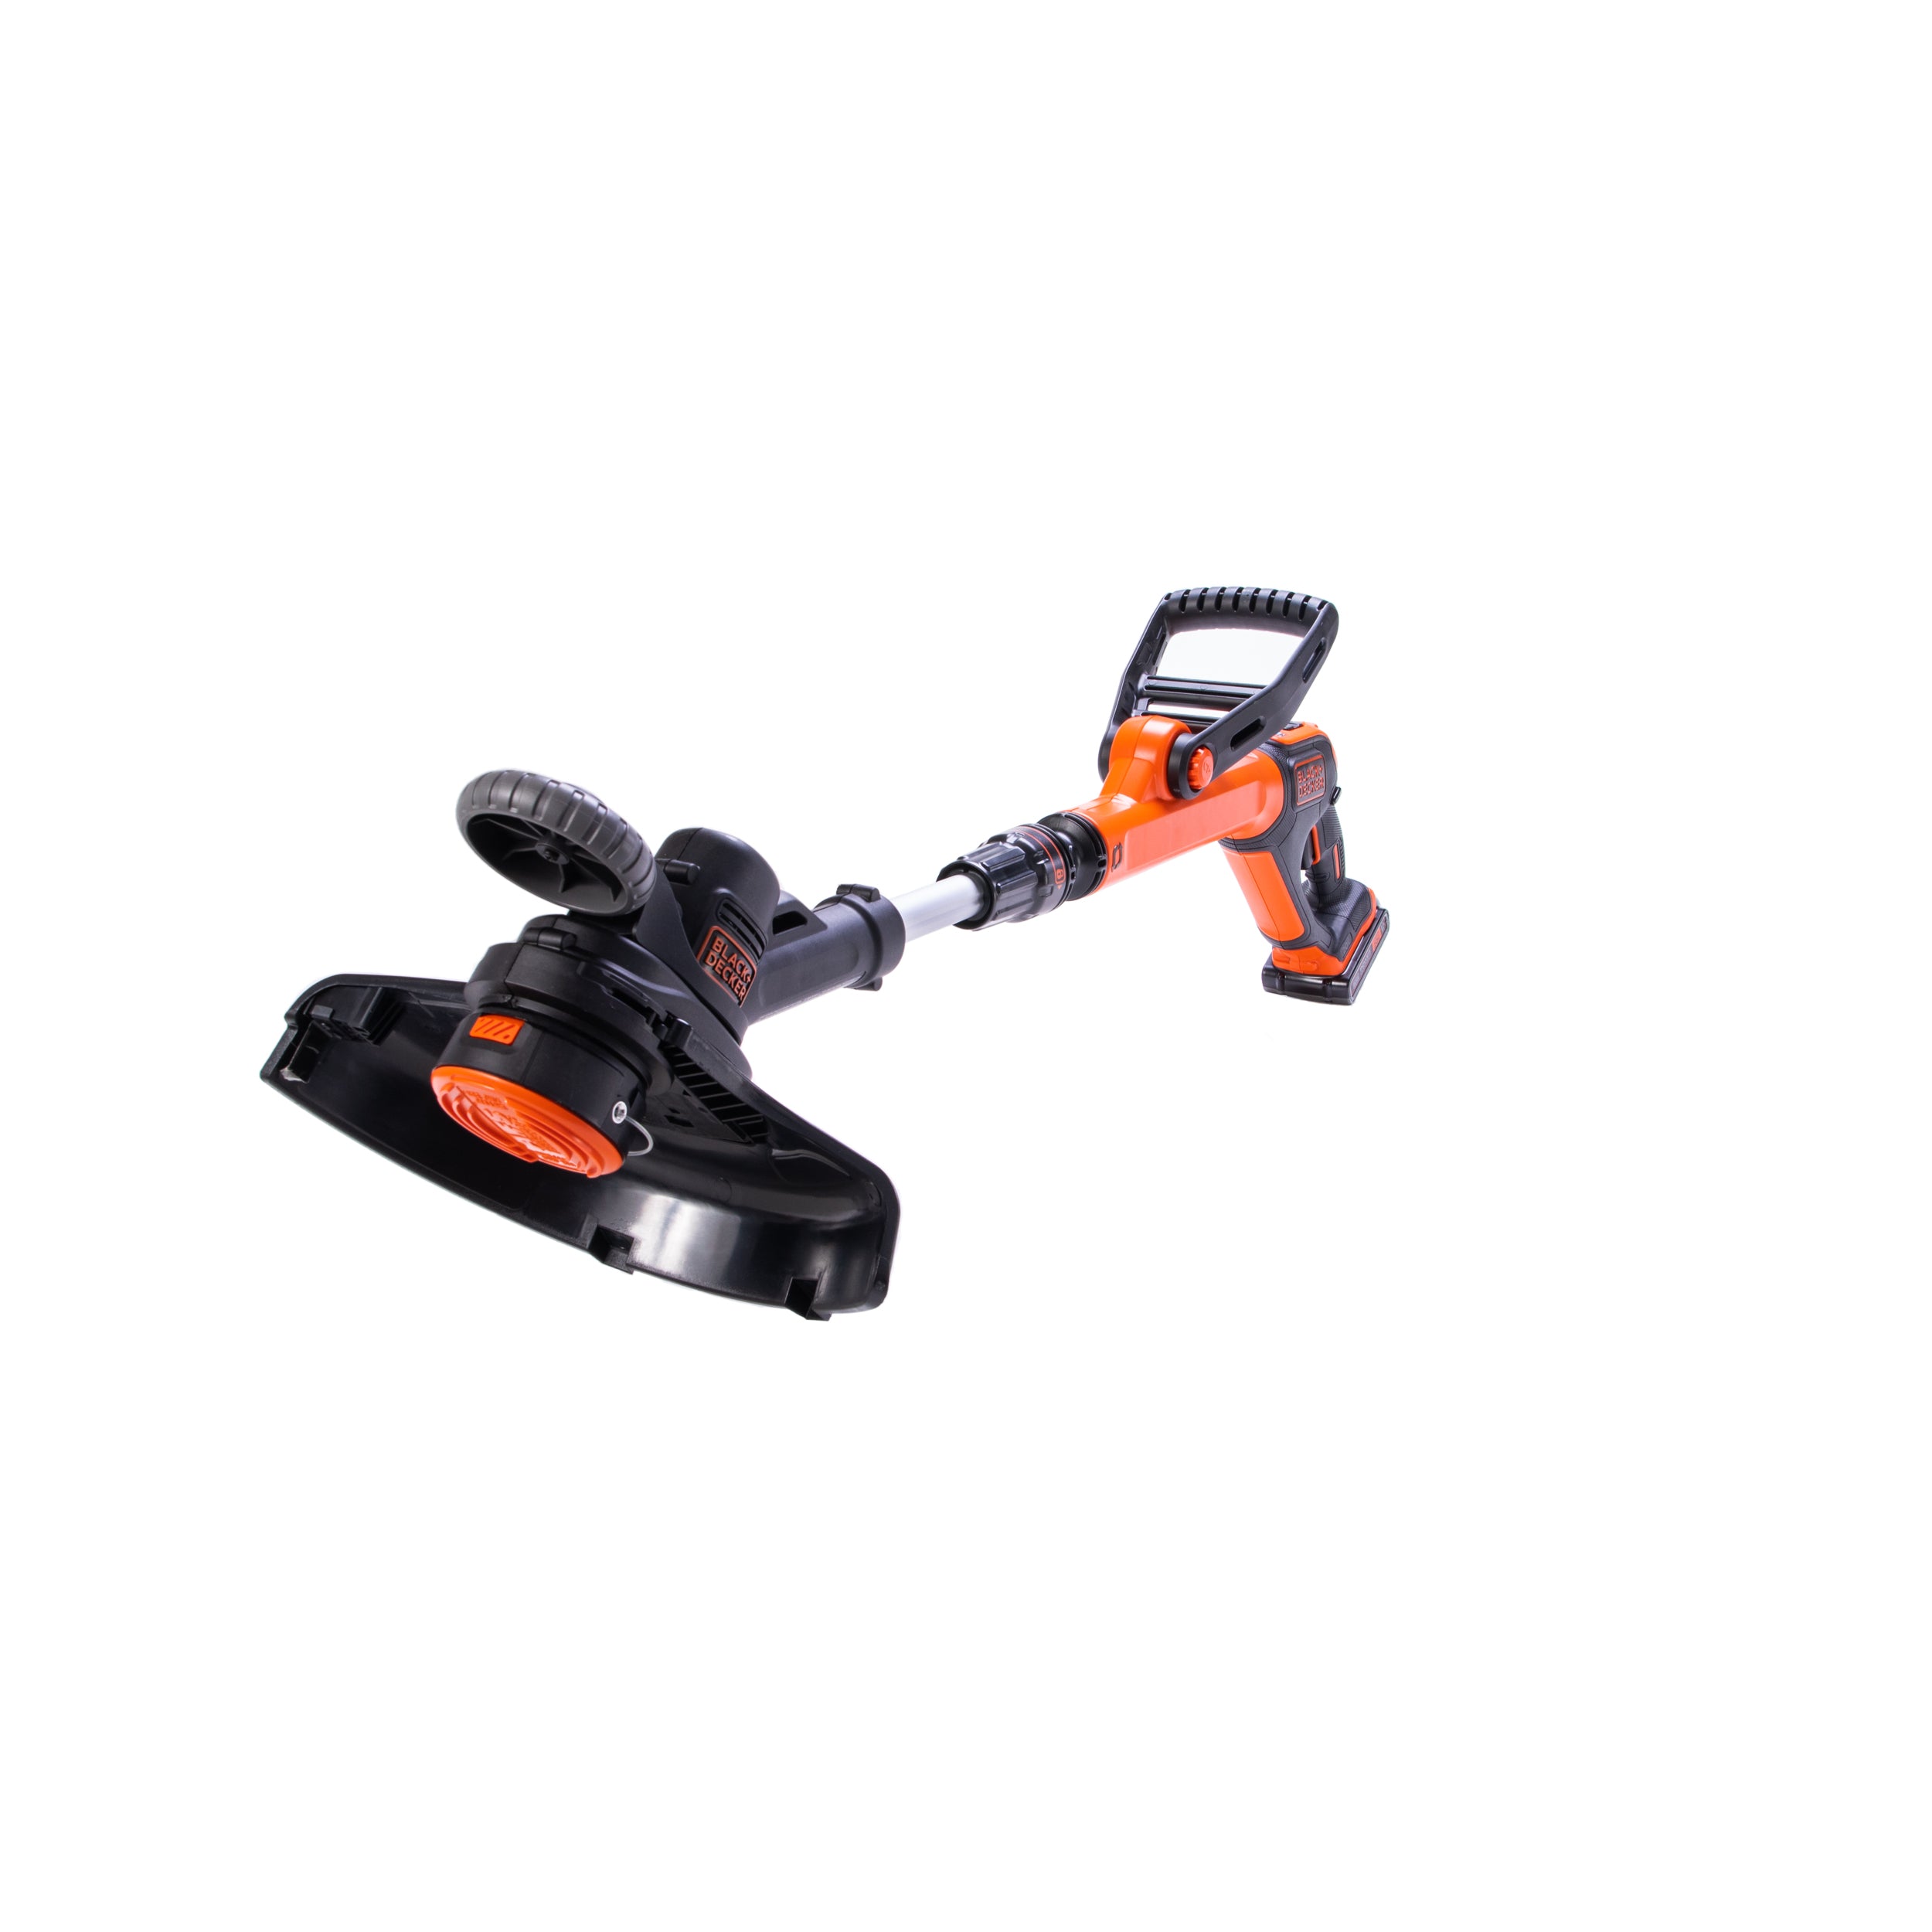 Black & Decker LST300 20V MAX* Lithium 12 Inch Trimmer/Edger (Type 2) Parts  and Accessories at PartsWarehouse